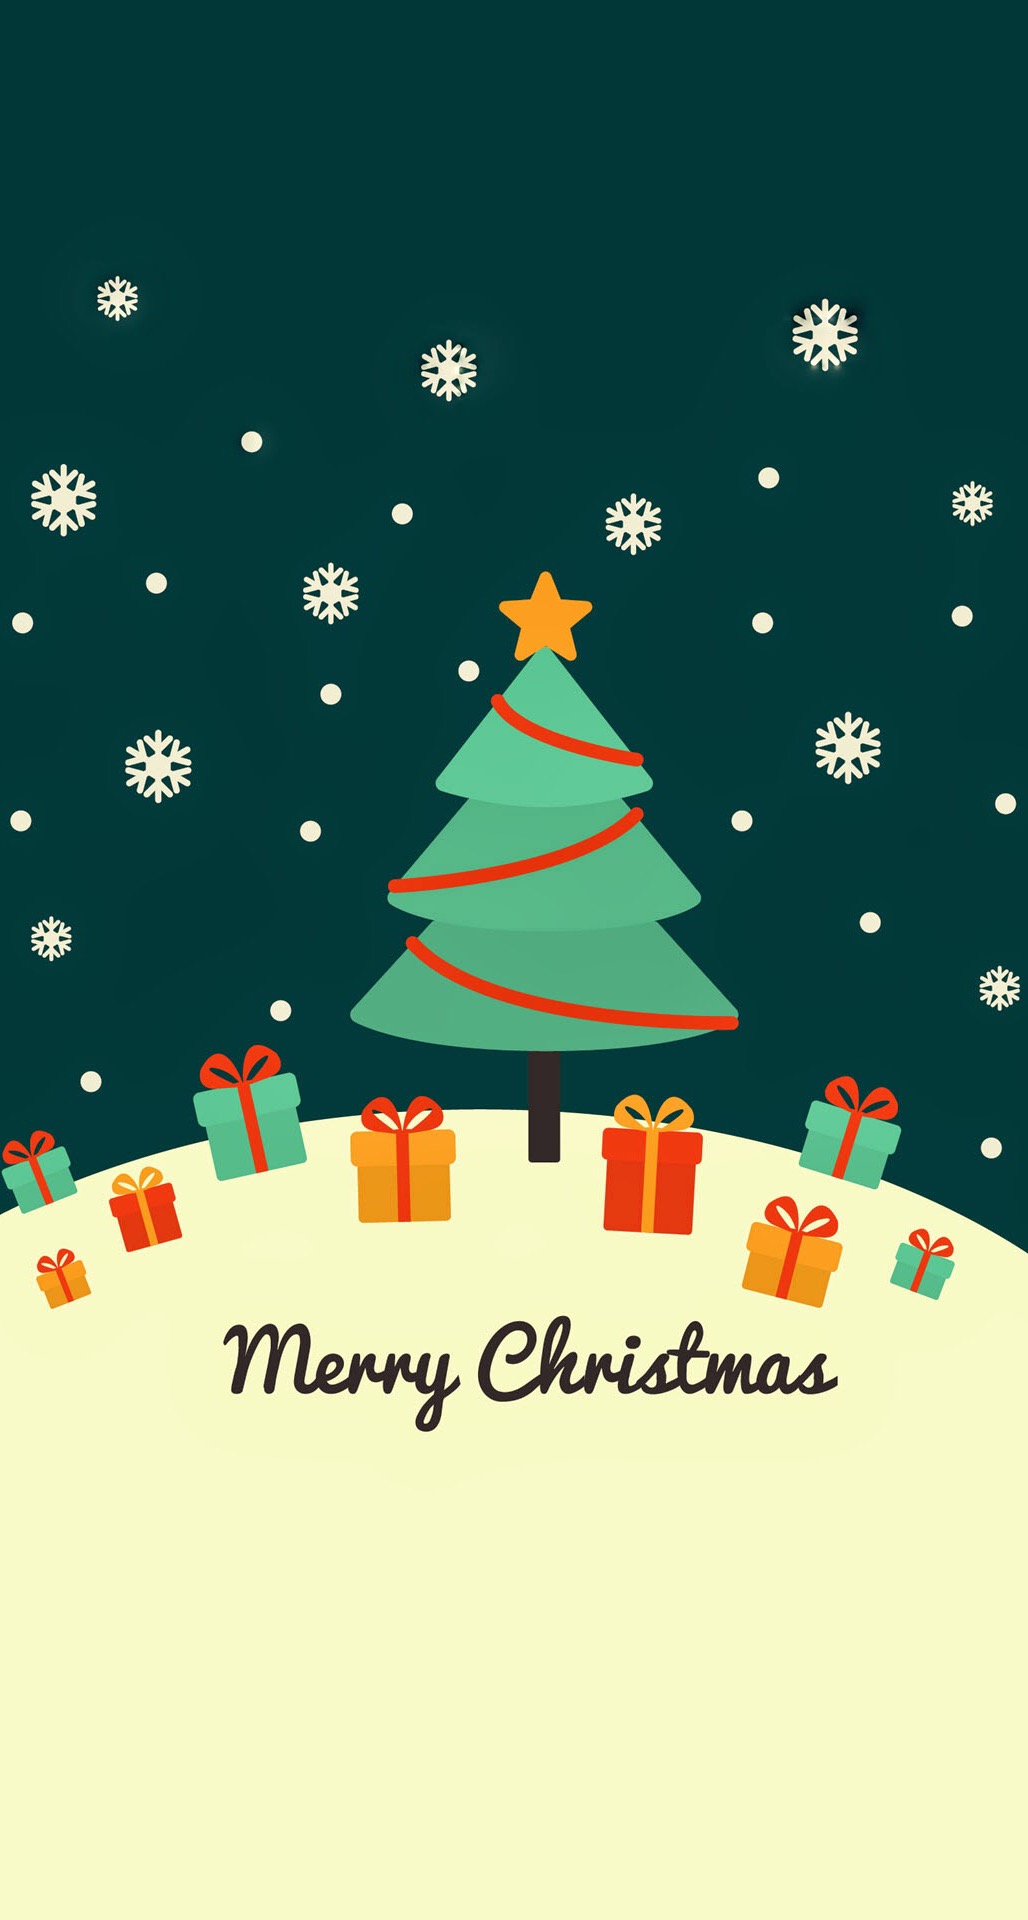 Santa Claus Hd Wallpaper For Mobile PNG Image With Transparent Background |  TOPpng